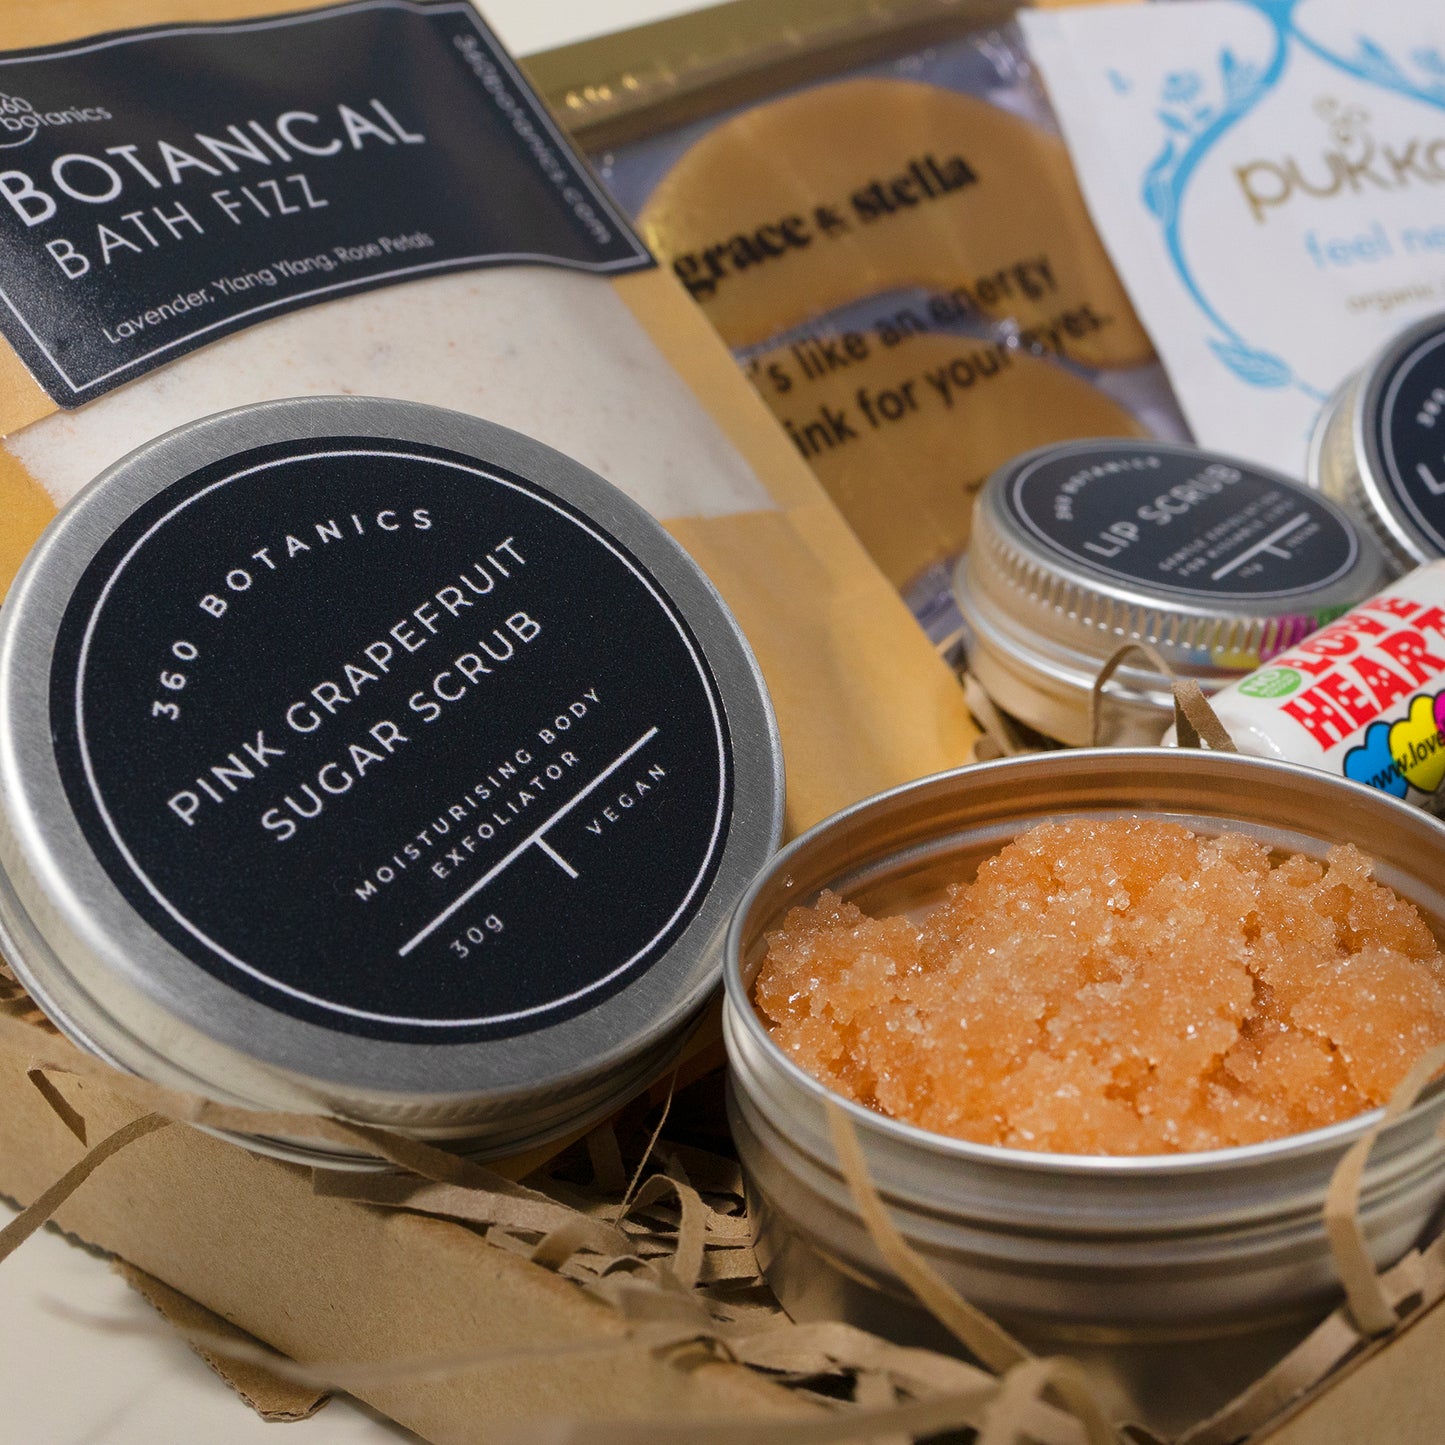  Close-up of "360 Botanics Pink Grapefruit Sugar Scrub" in an open metal tin, with granular texture visible, alongside other self-care products like "Botanical Bath Fizz" and "Grace & Stella" eye masks, partially visible in the background. The products are placed on a straw-filled surface.